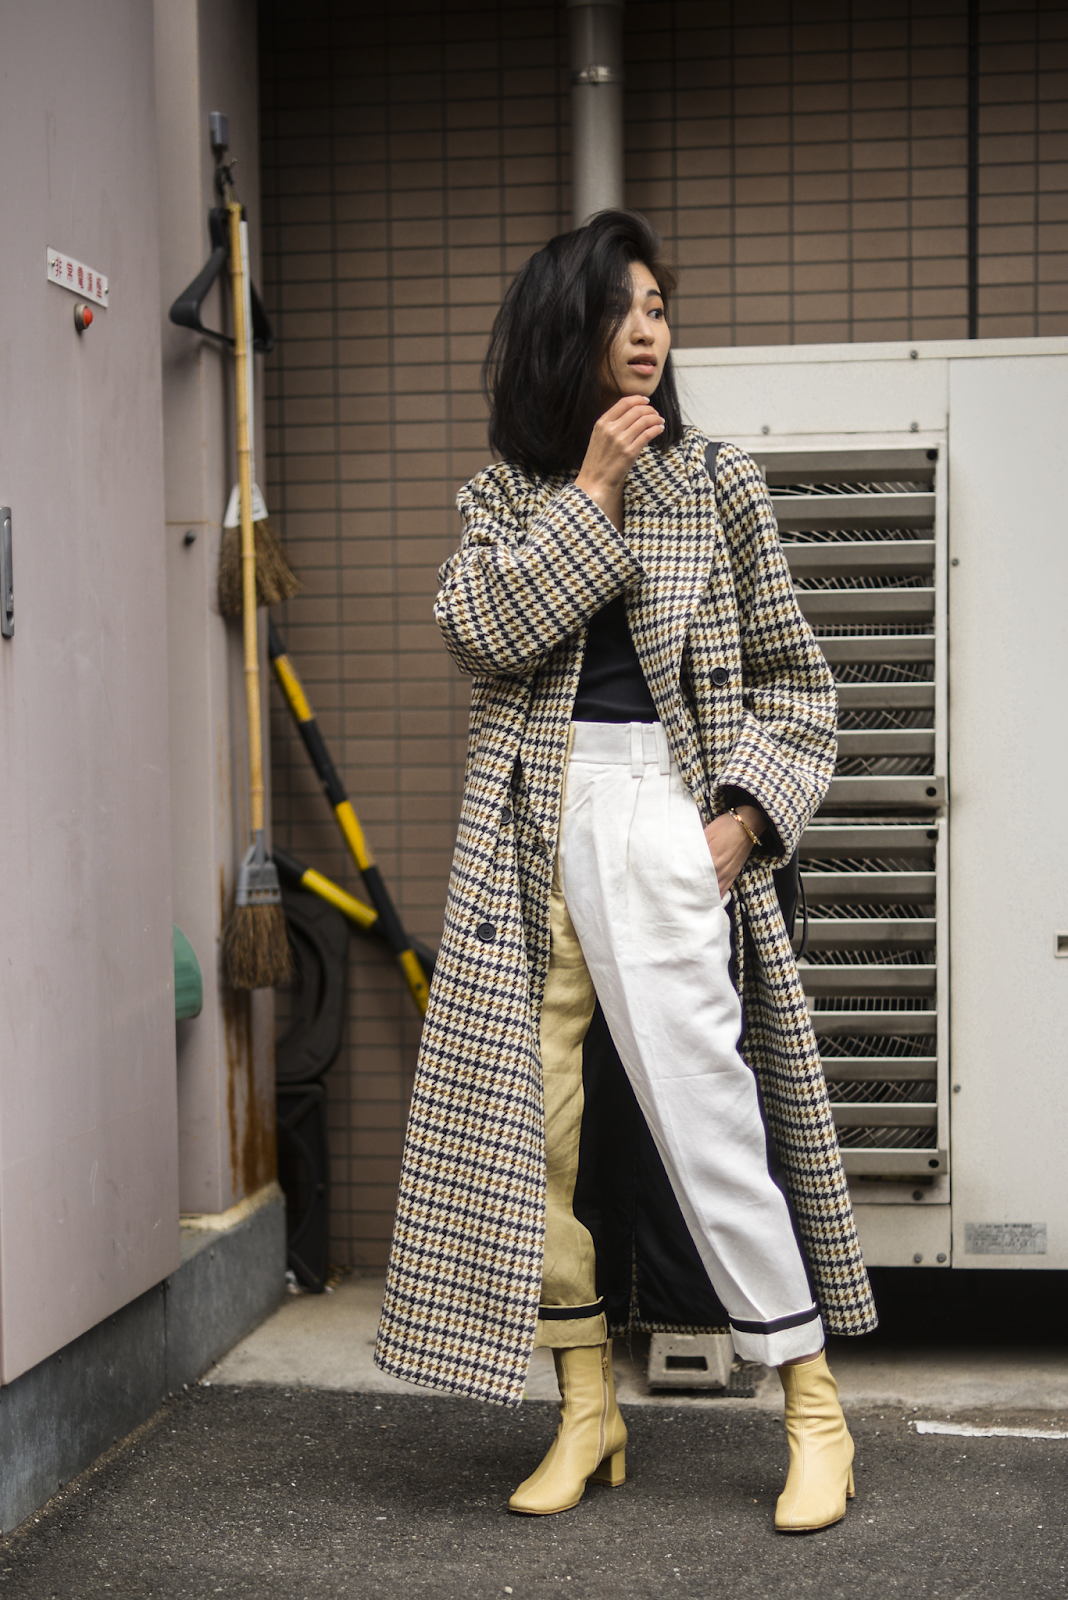 Houndstooth oversized coat, long coat outfit ideas, white black and beige winter outfit ideas, styling color-block pants, sofia by far boots - FOREVERVANNY.com